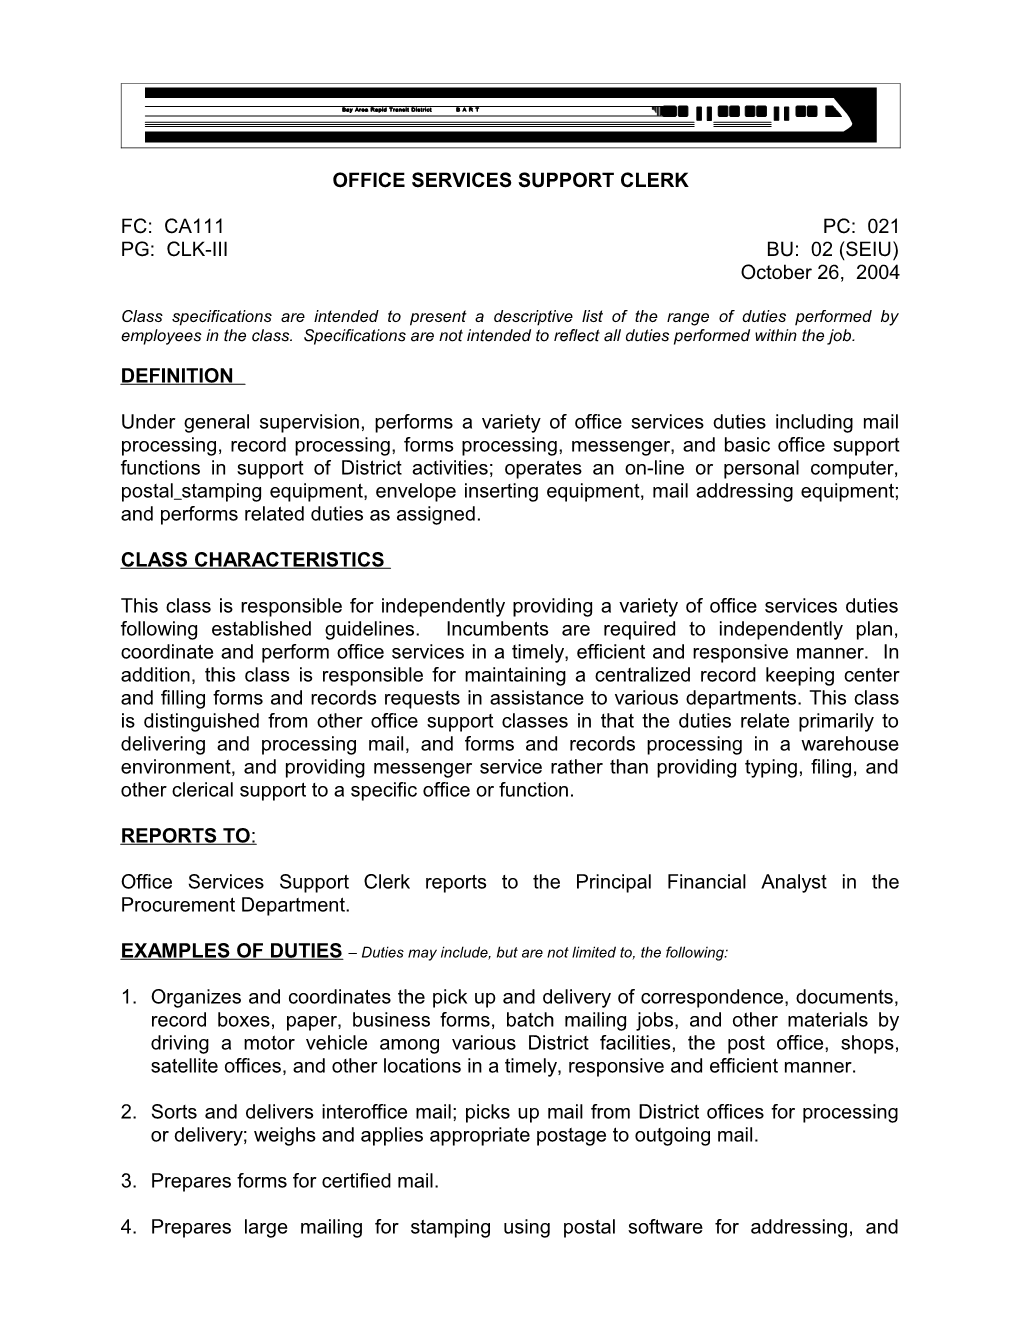 Office Services Support Clerk